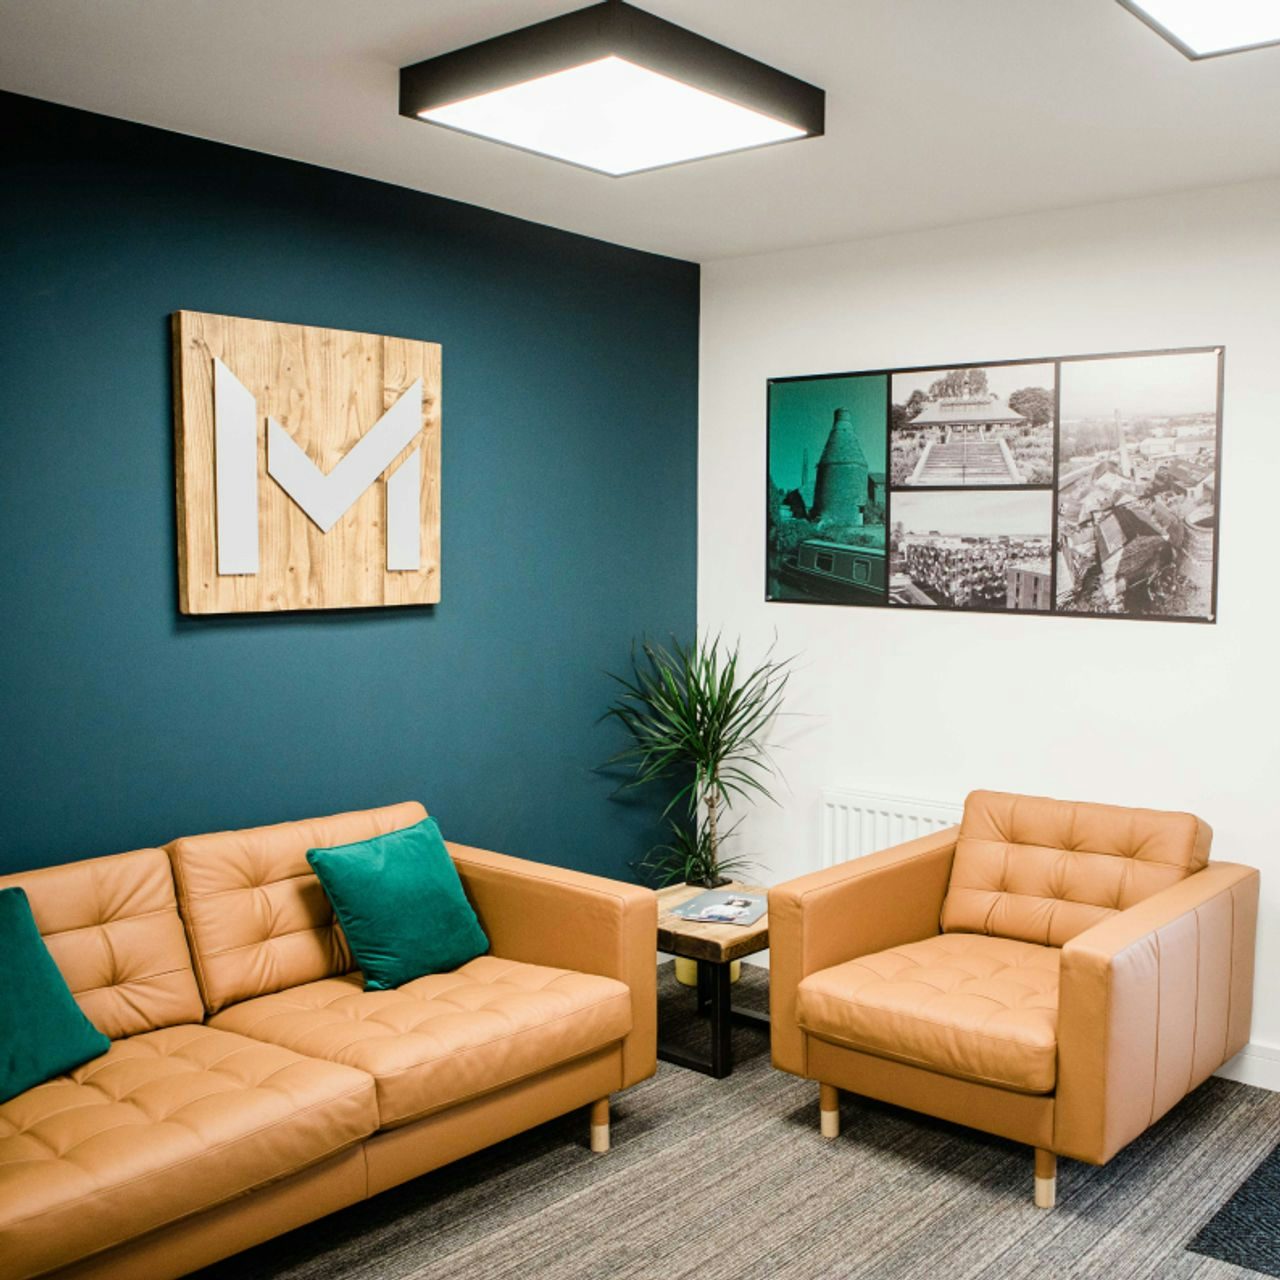 Office waiting area with teal accent wall featuring a company logo, leather seating, and urban-themed wall art, embodying a professional yet welcoming environment.